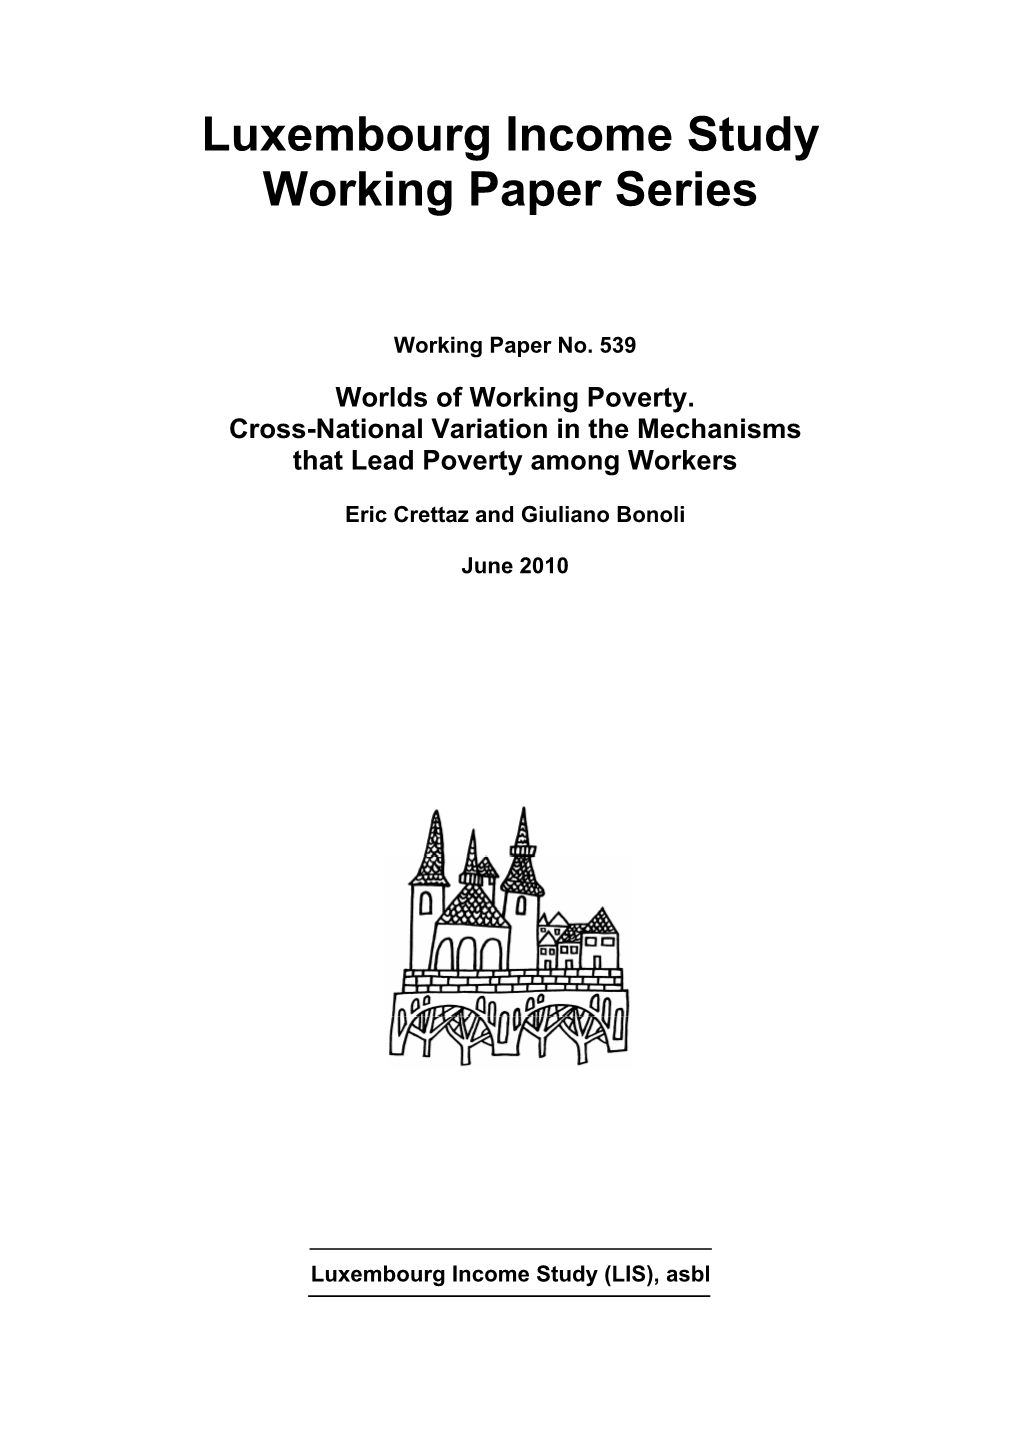 Luxembourg Income Study Working Paper Series